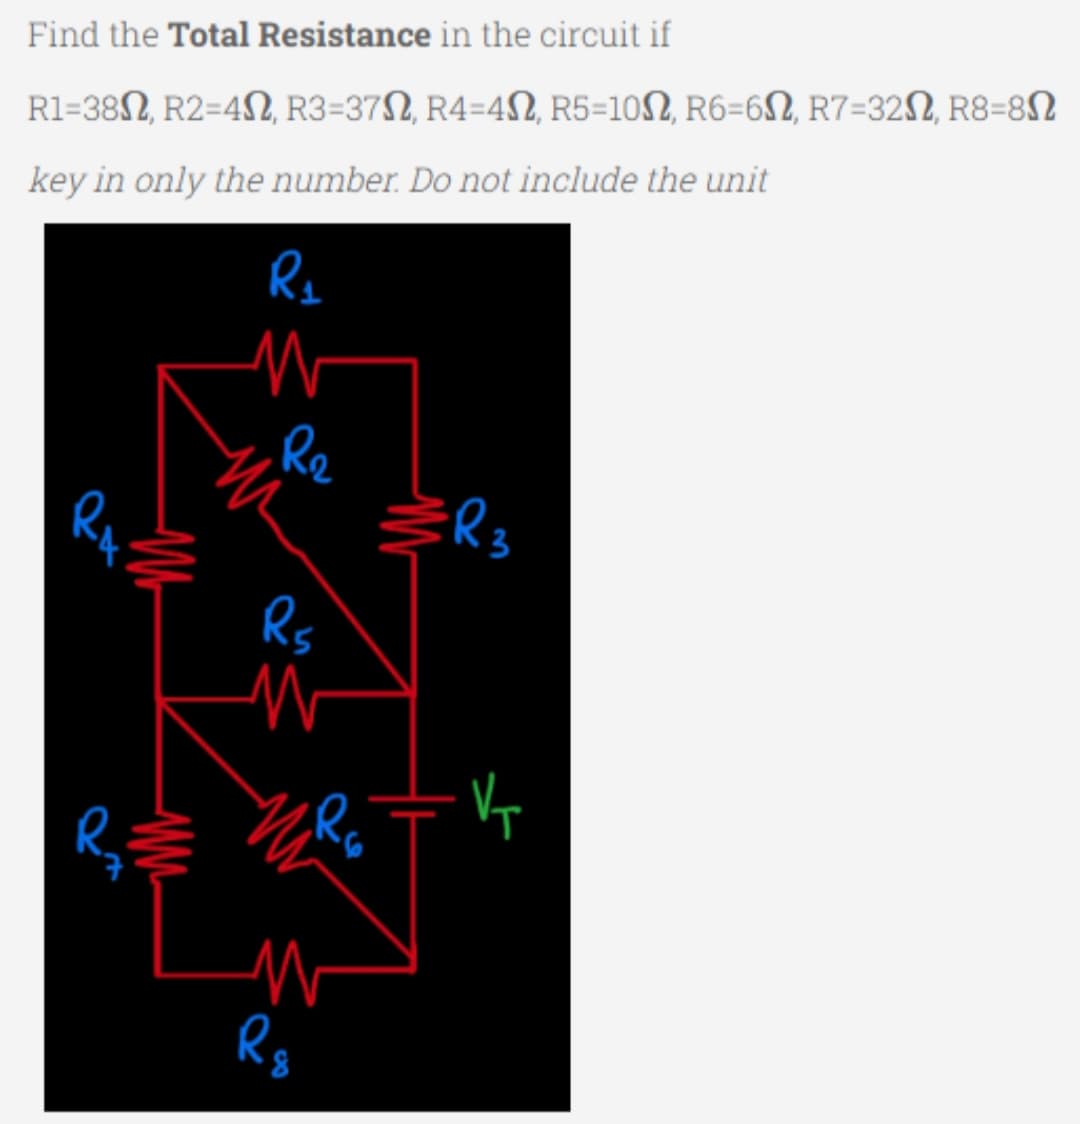 Find the Total Resistance in the circuit if
R1-382, R2=402, R3=372, R4-4, R5=102, R6-62, R7=320, R8=8
key in only the number. Do not include the unit
RA:
R
R₁
W
R₂
M
R₁
W
ZR
W
Rg
R3
Vq